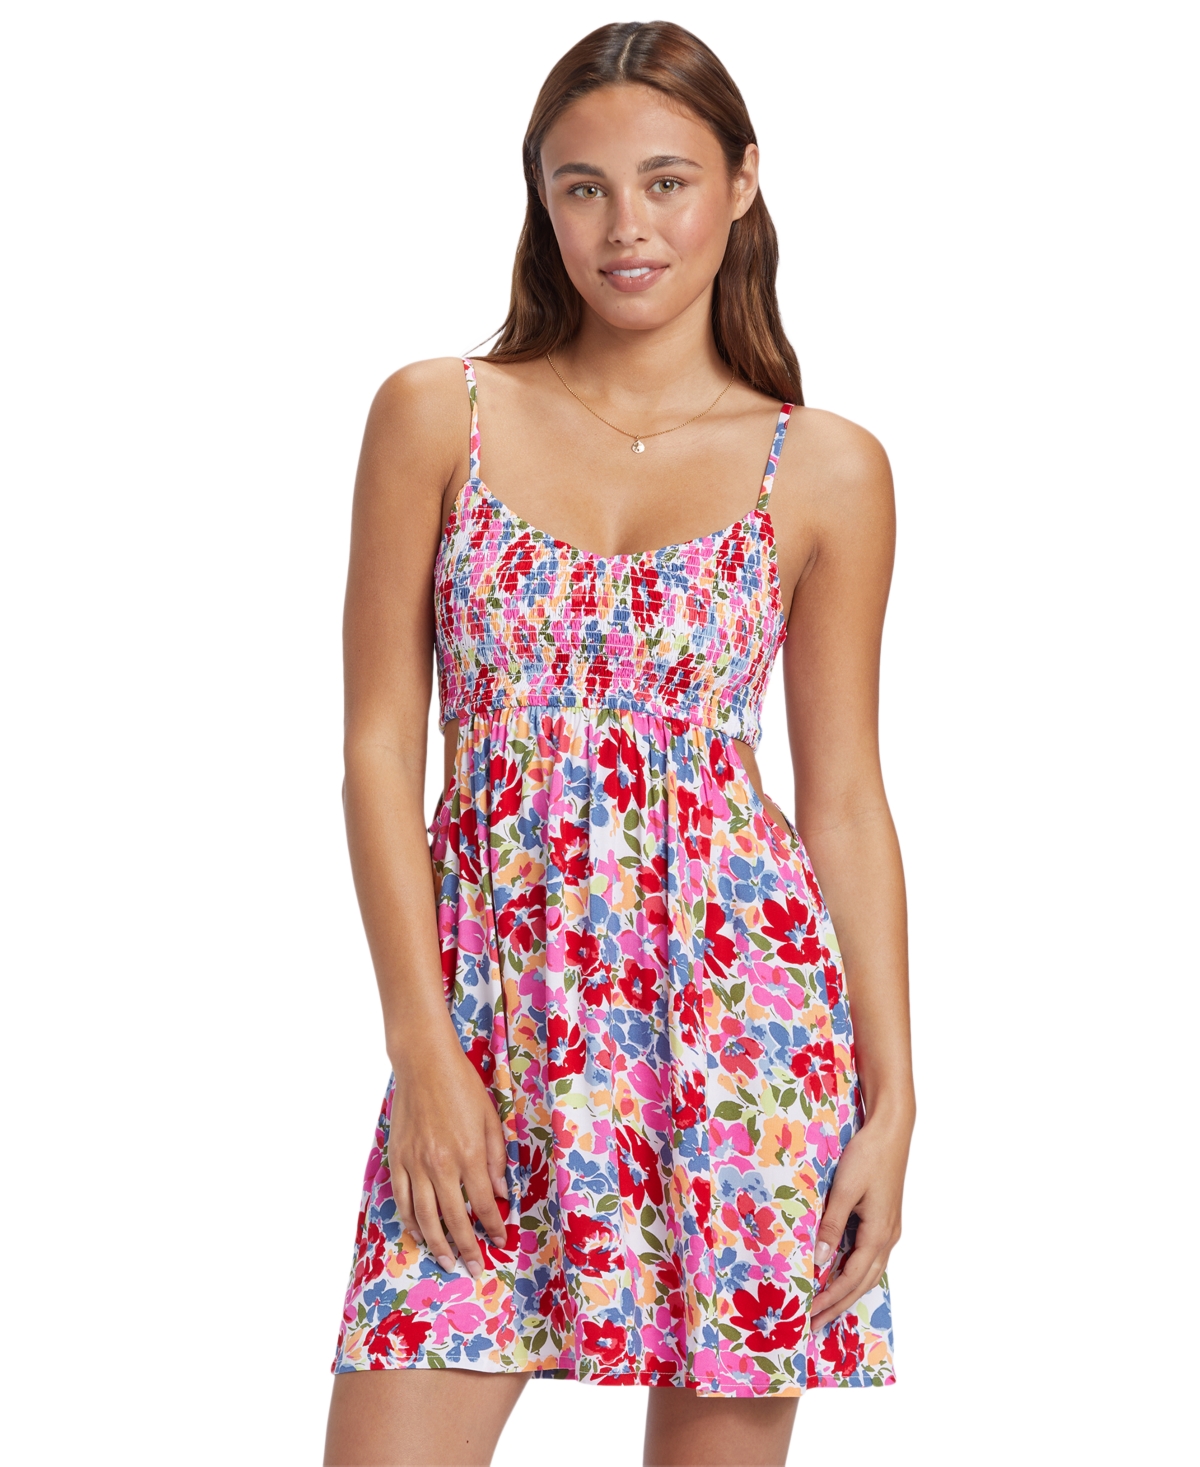 Roxy Juniors' Printed Summer Adventures Dress Cover-up Women's Swimsuit In Shocking Pink Bloomin Babe